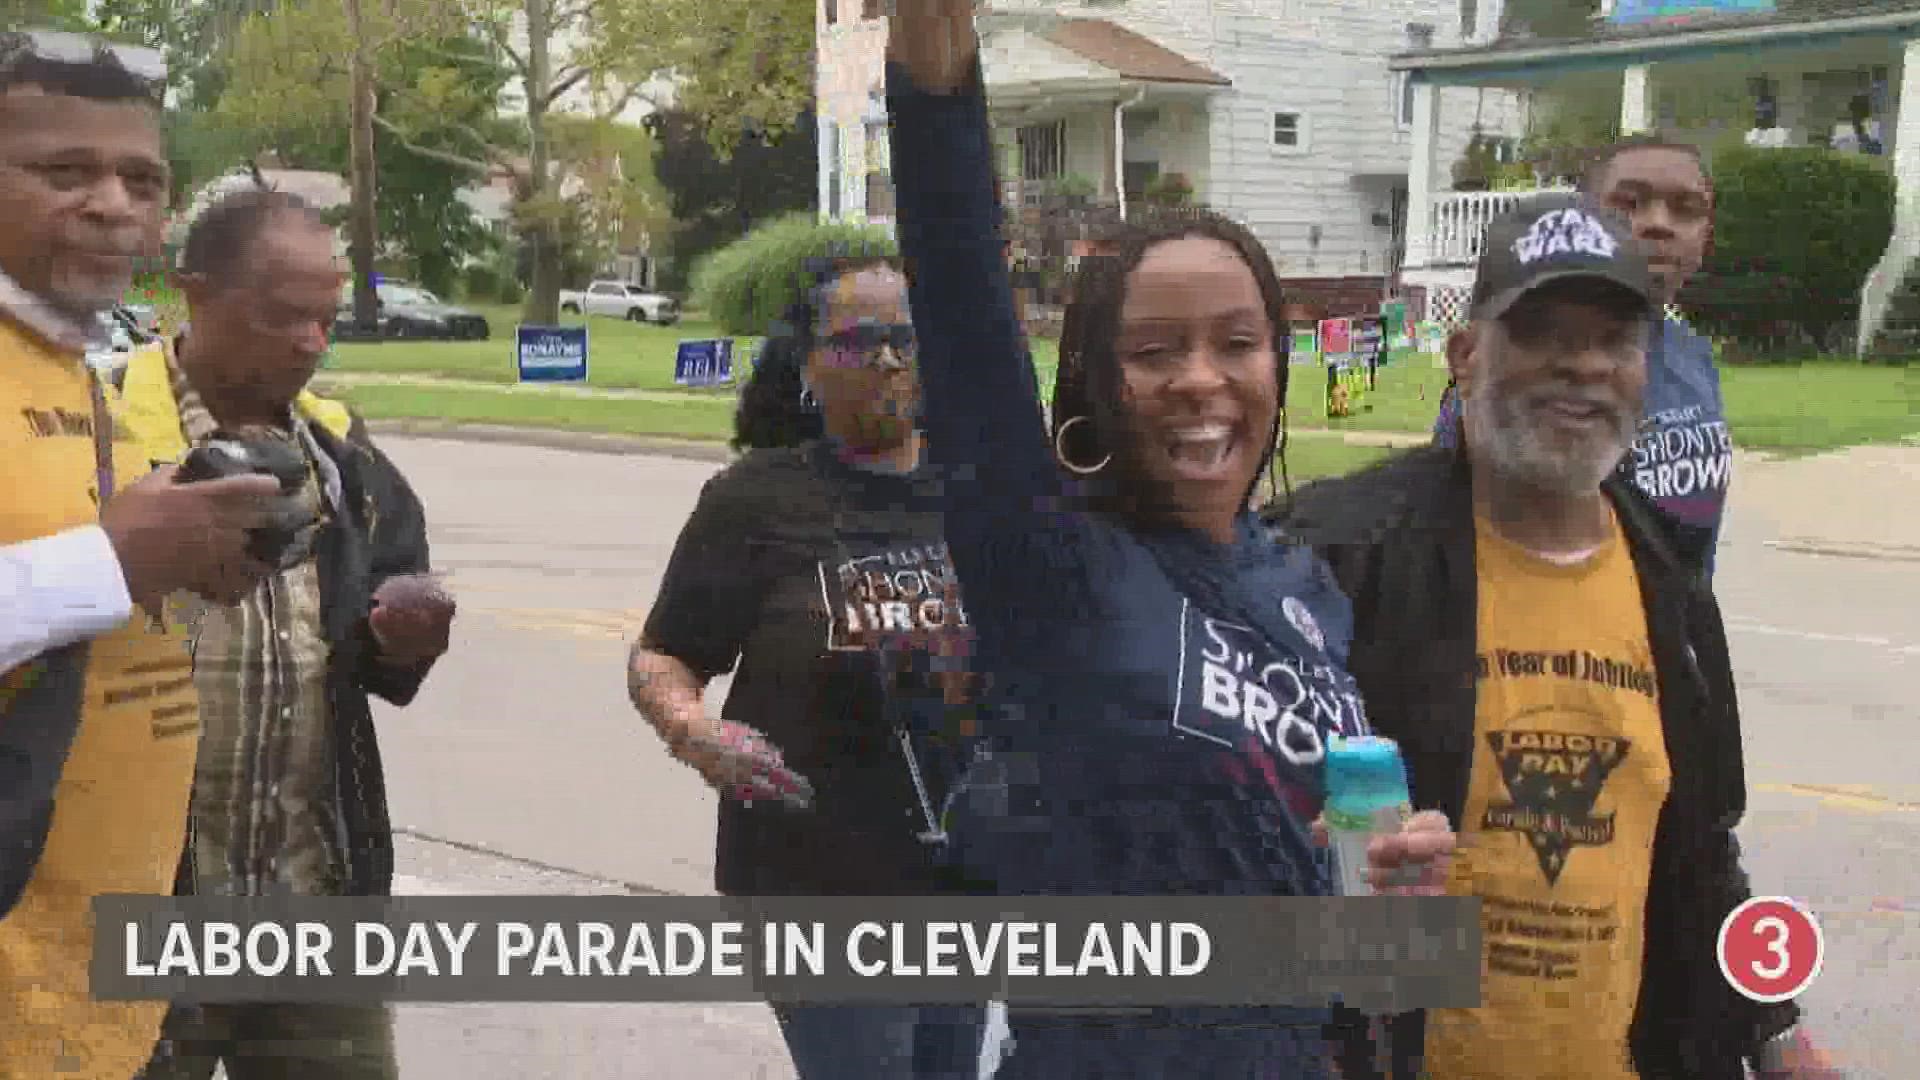 Cleveland Labor Day parade 2022 Watch video of the full parade